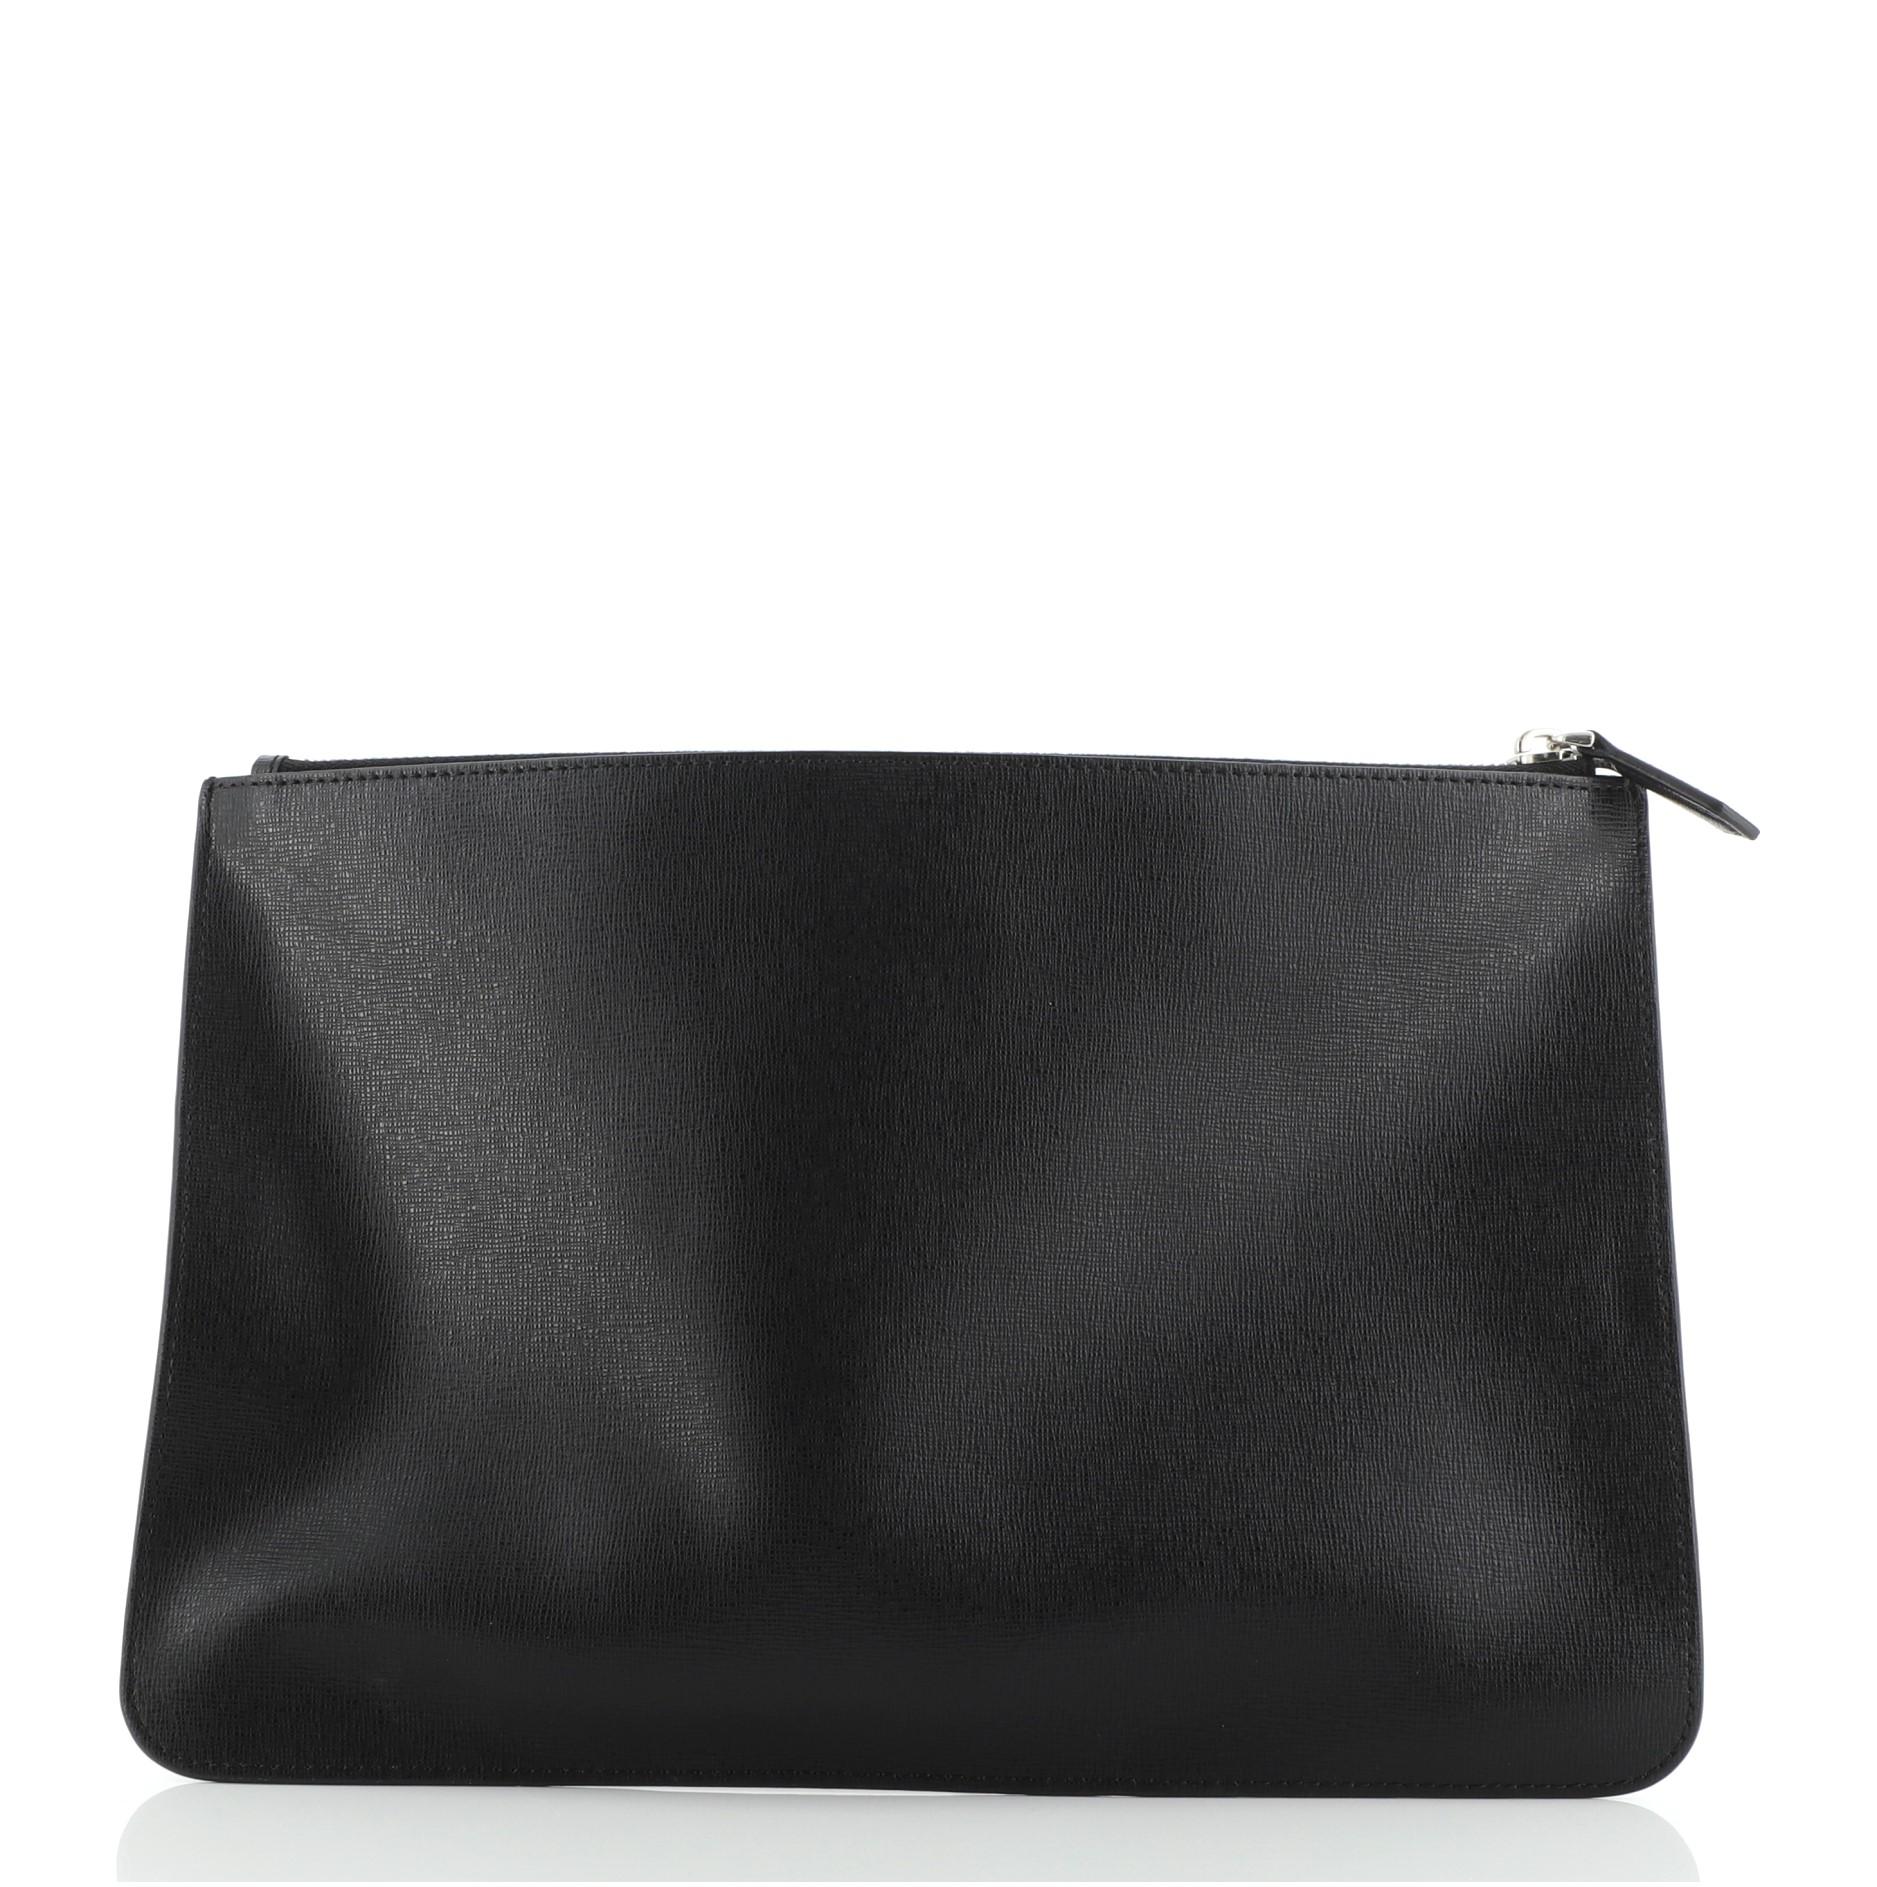 Fendi Karlito Pouch Studded Saffiano Leather Medium
Black

Condition Details: Slight scuffs and wear on exterior, scratches on hardware.

51849MSC

Height 8